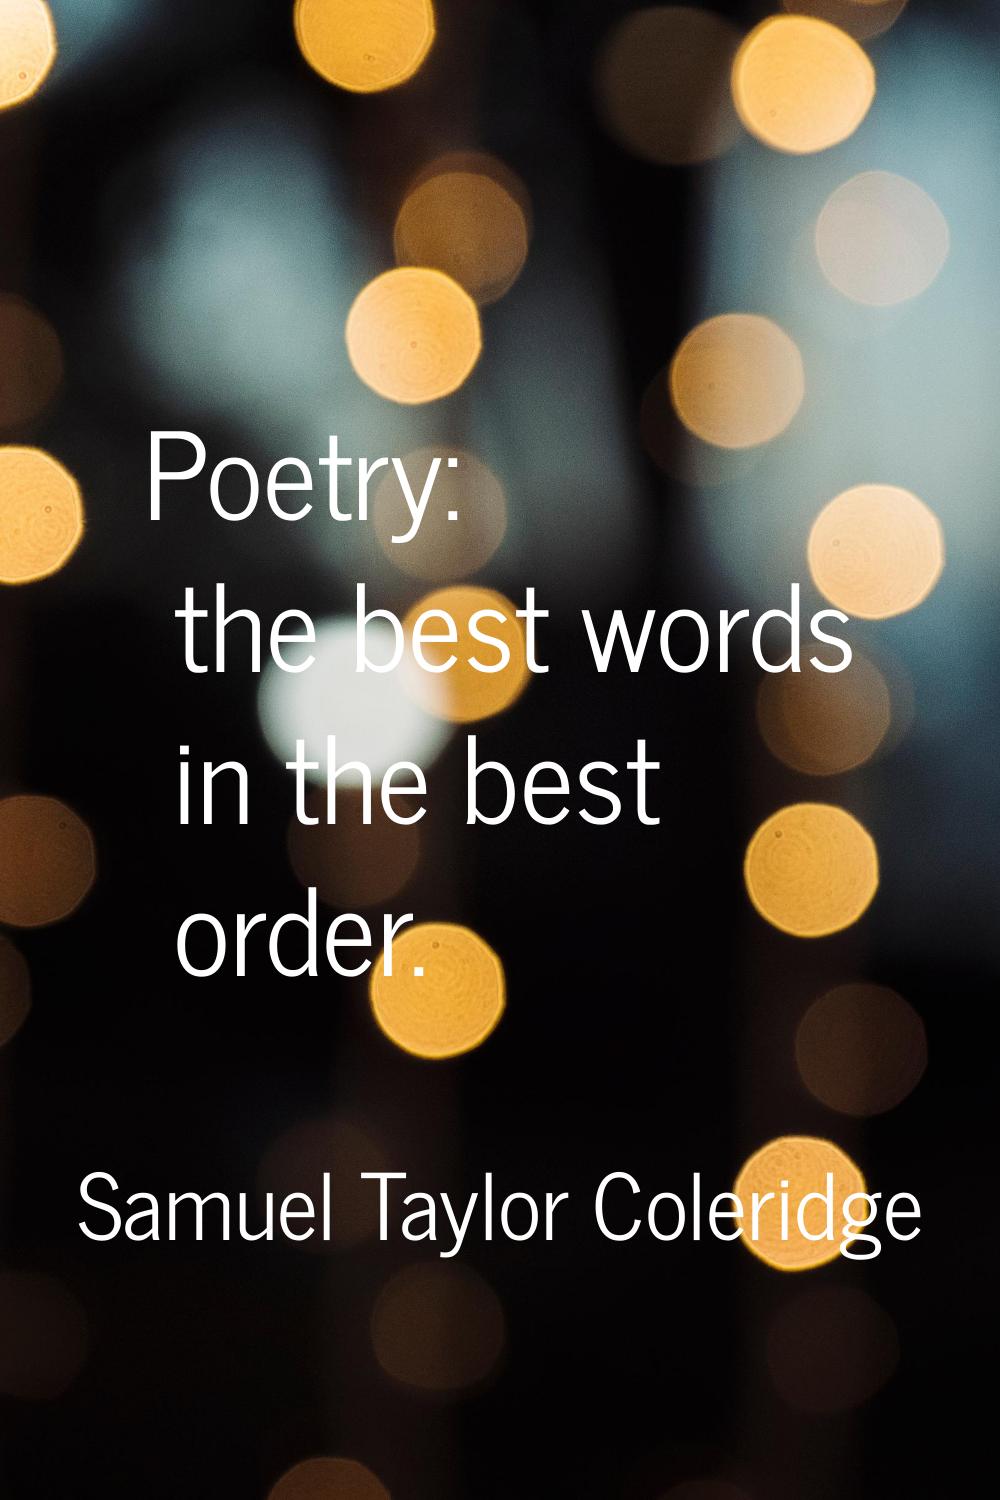 Poetry: the best words in the best order.